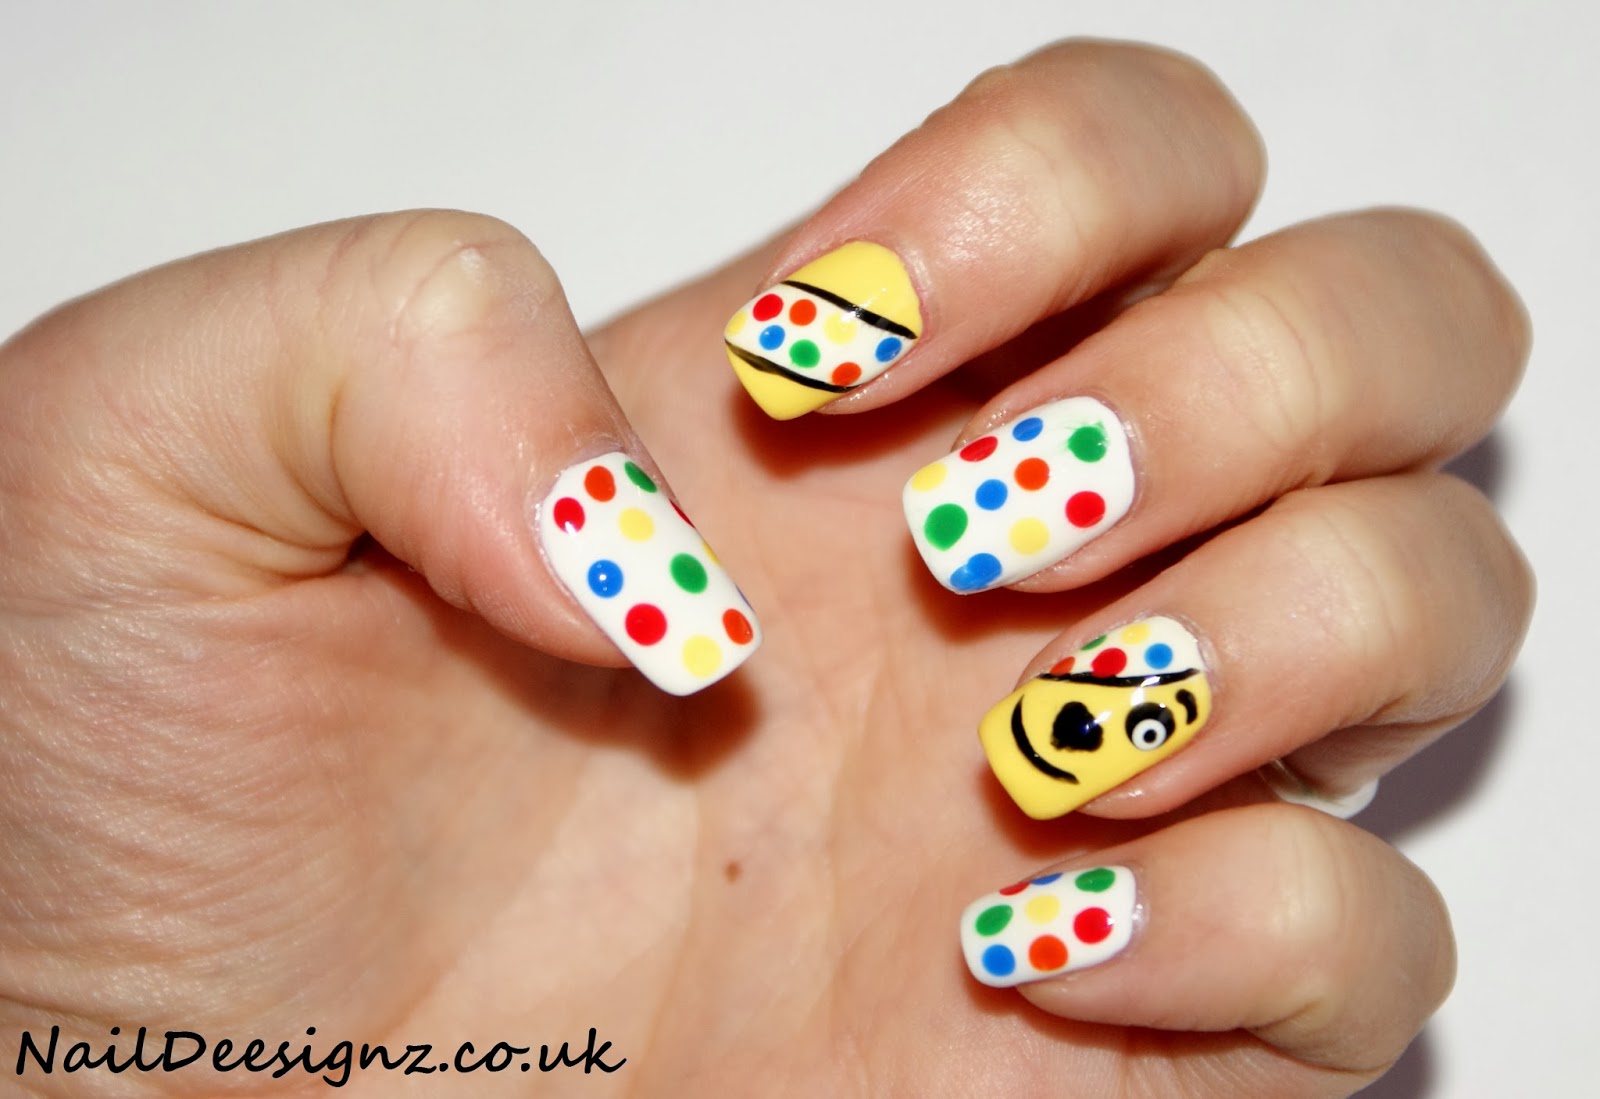 1. Easy Nail Art for Kids - wide 5